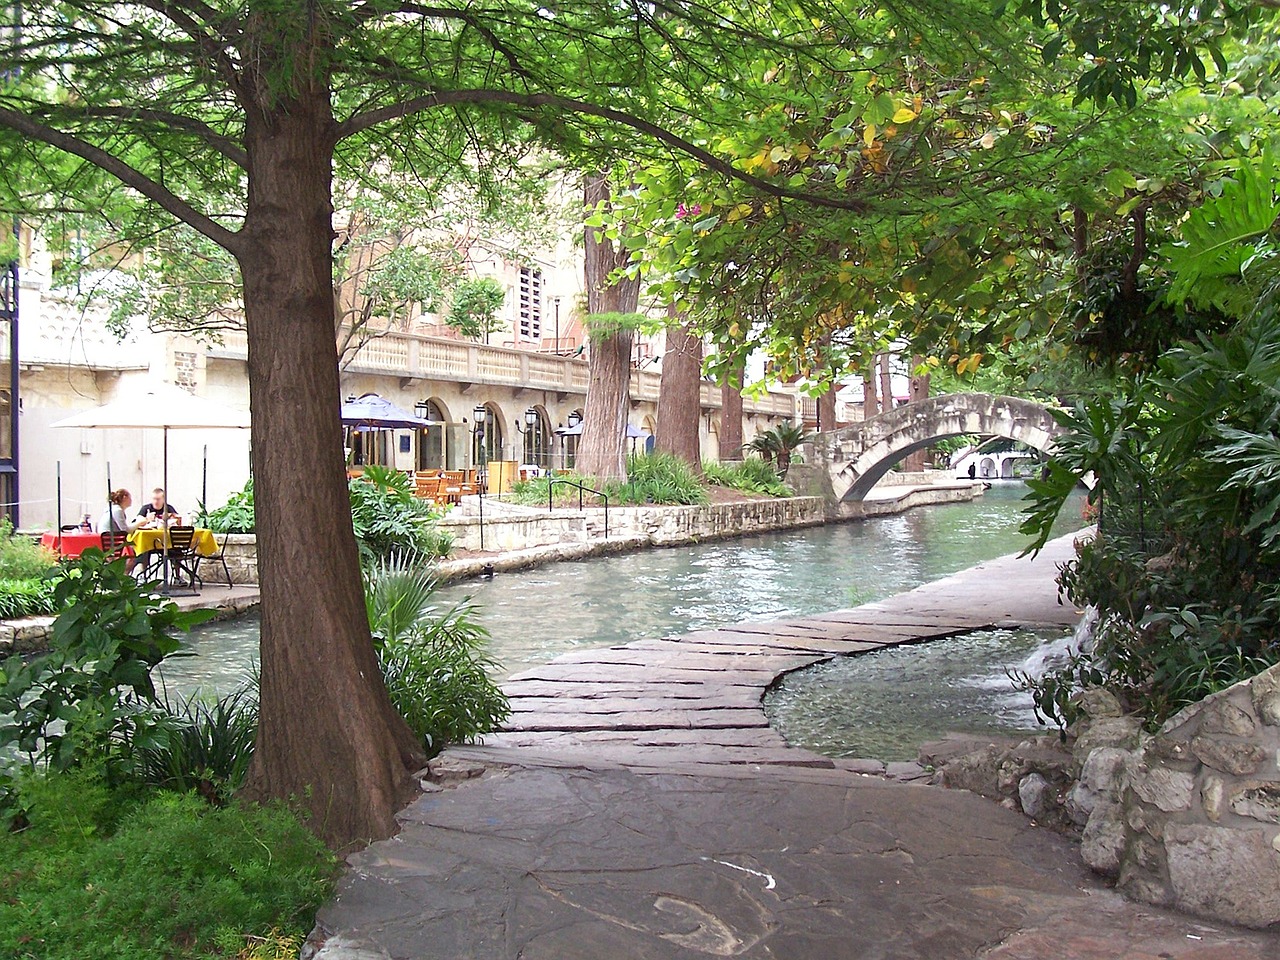 5-Day San Antonio Adventure with River Walk and Culinary Delights